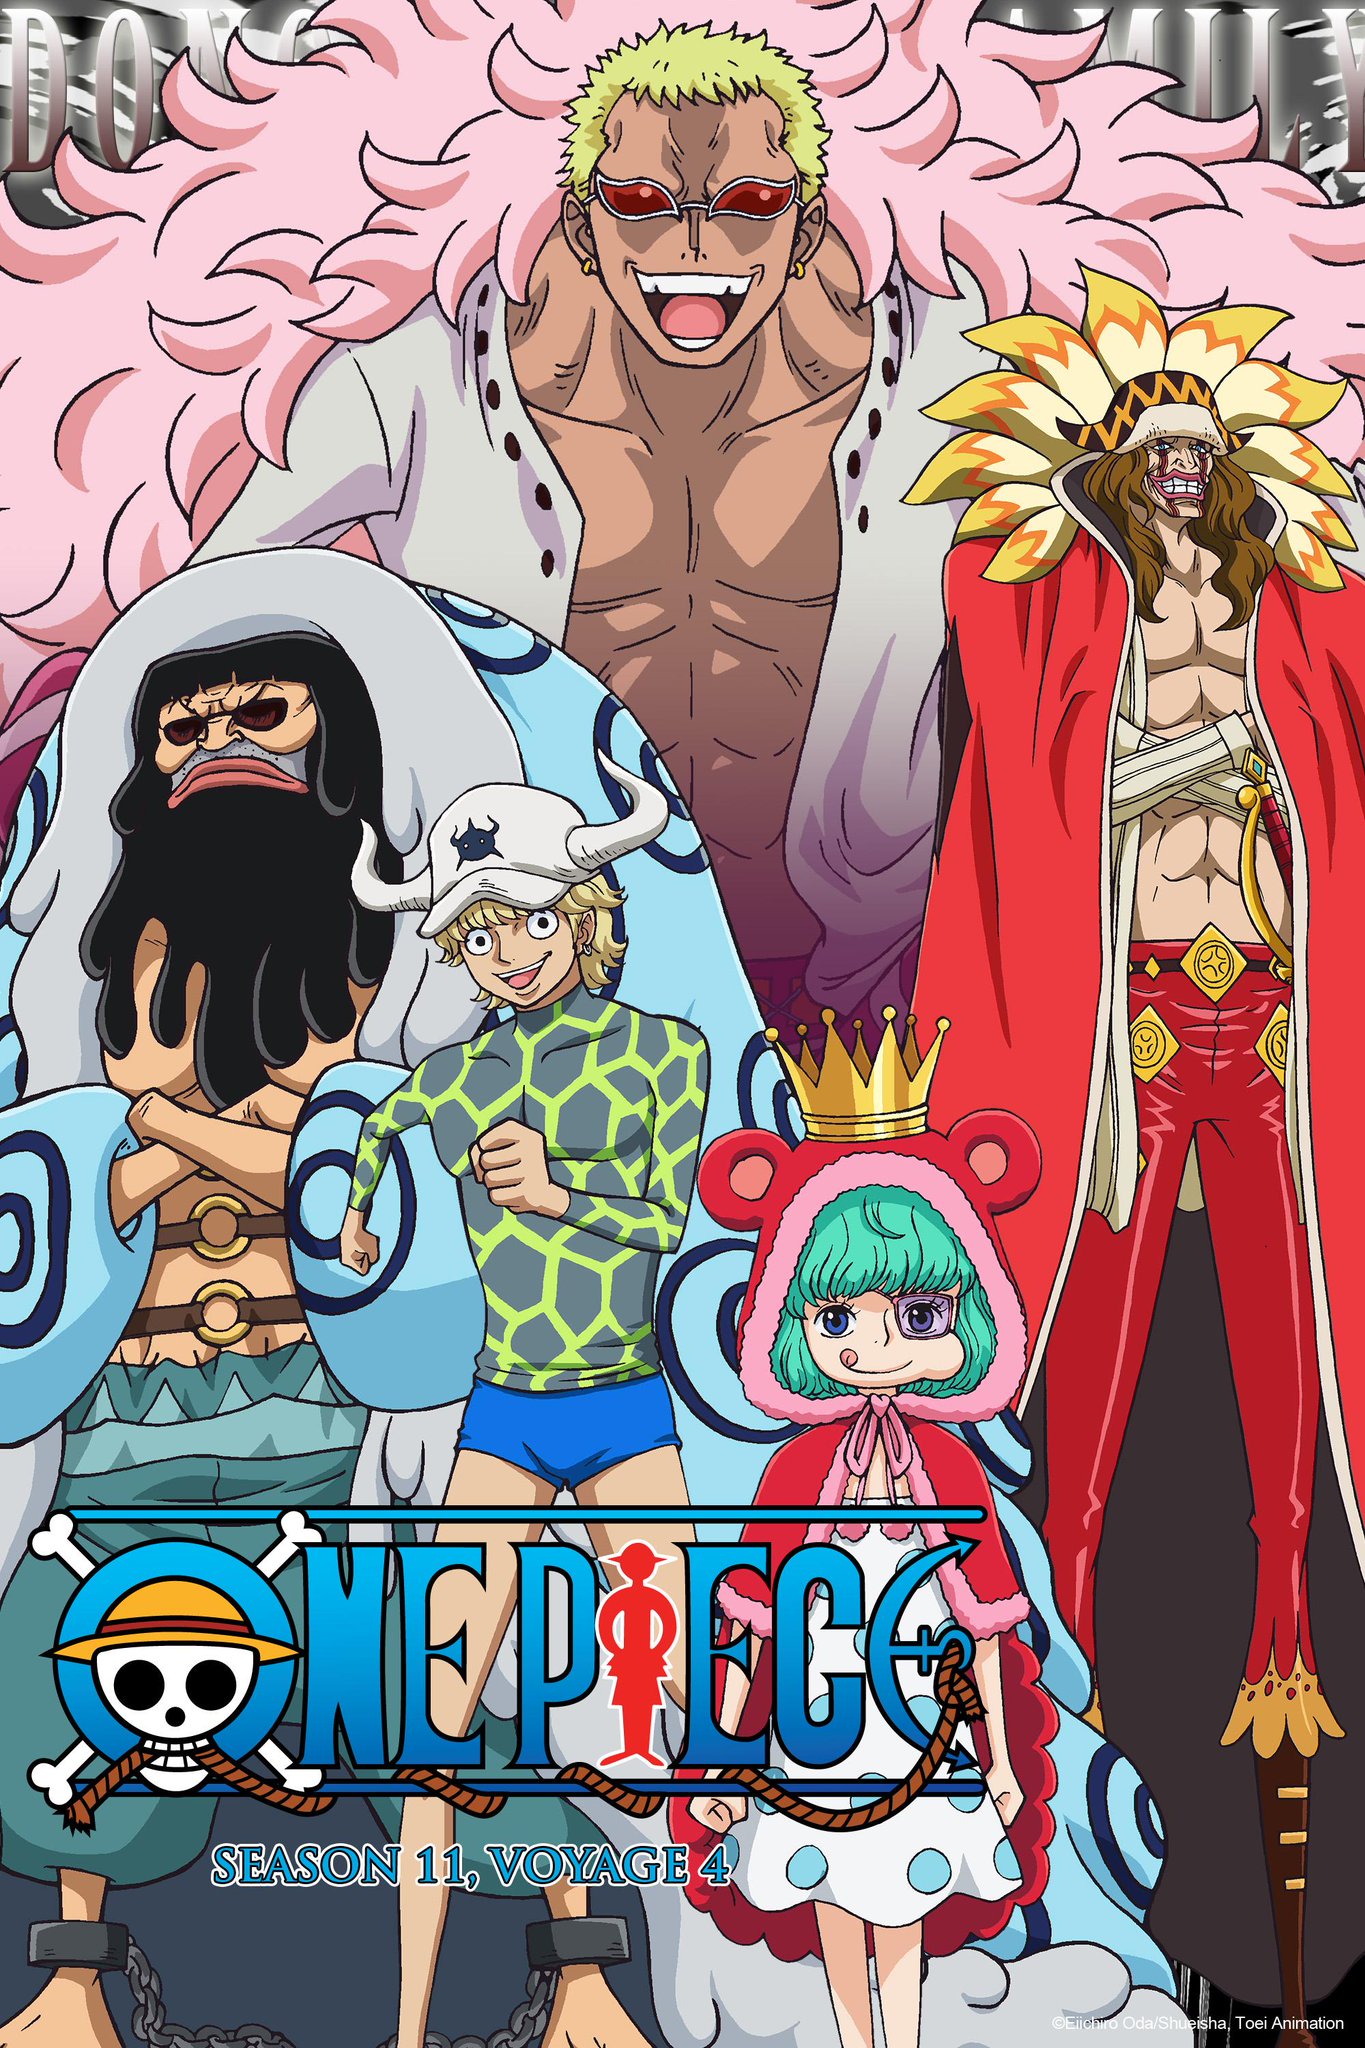 One Piece Psst The Next Batch Of One Piece English Dub Episodes Is Already Here Season 11 Voyage 4 Episodes 668 680 Arrives In Digital Storefronts Today T Co Tvlietosgz T Co Kfgliyrqzd